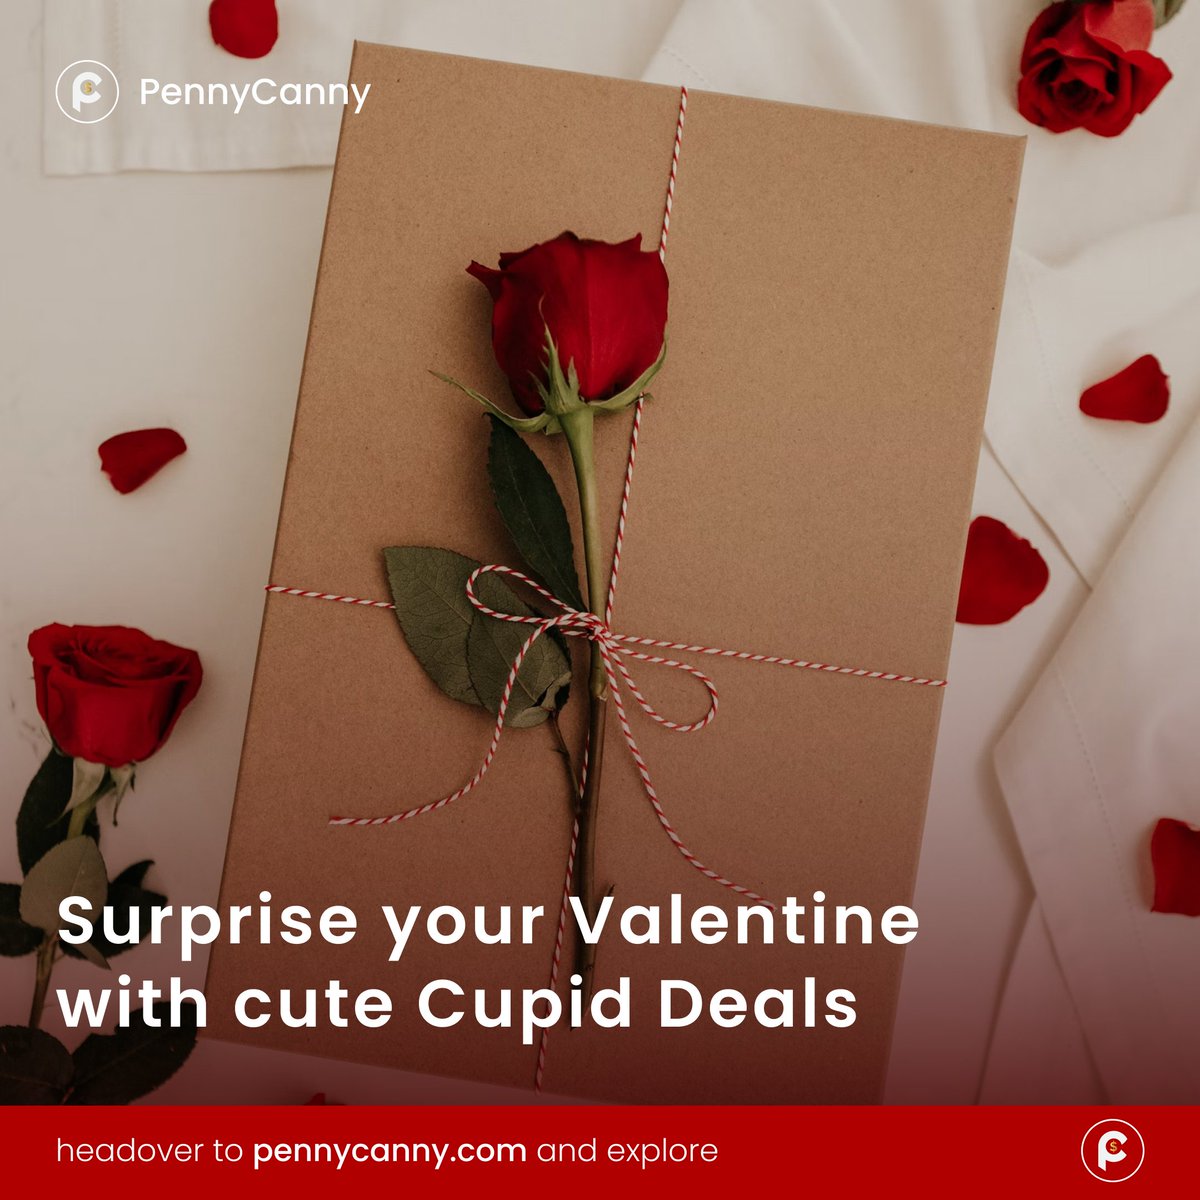 Love is in the air, and so is the Valentine's Day offers! 💕❤️
Spoil your significant other (or yourself 😉) with special #discountstore

pennycanny.com

Happy #ValentinesDay from our team to you! 😍🎁🌹